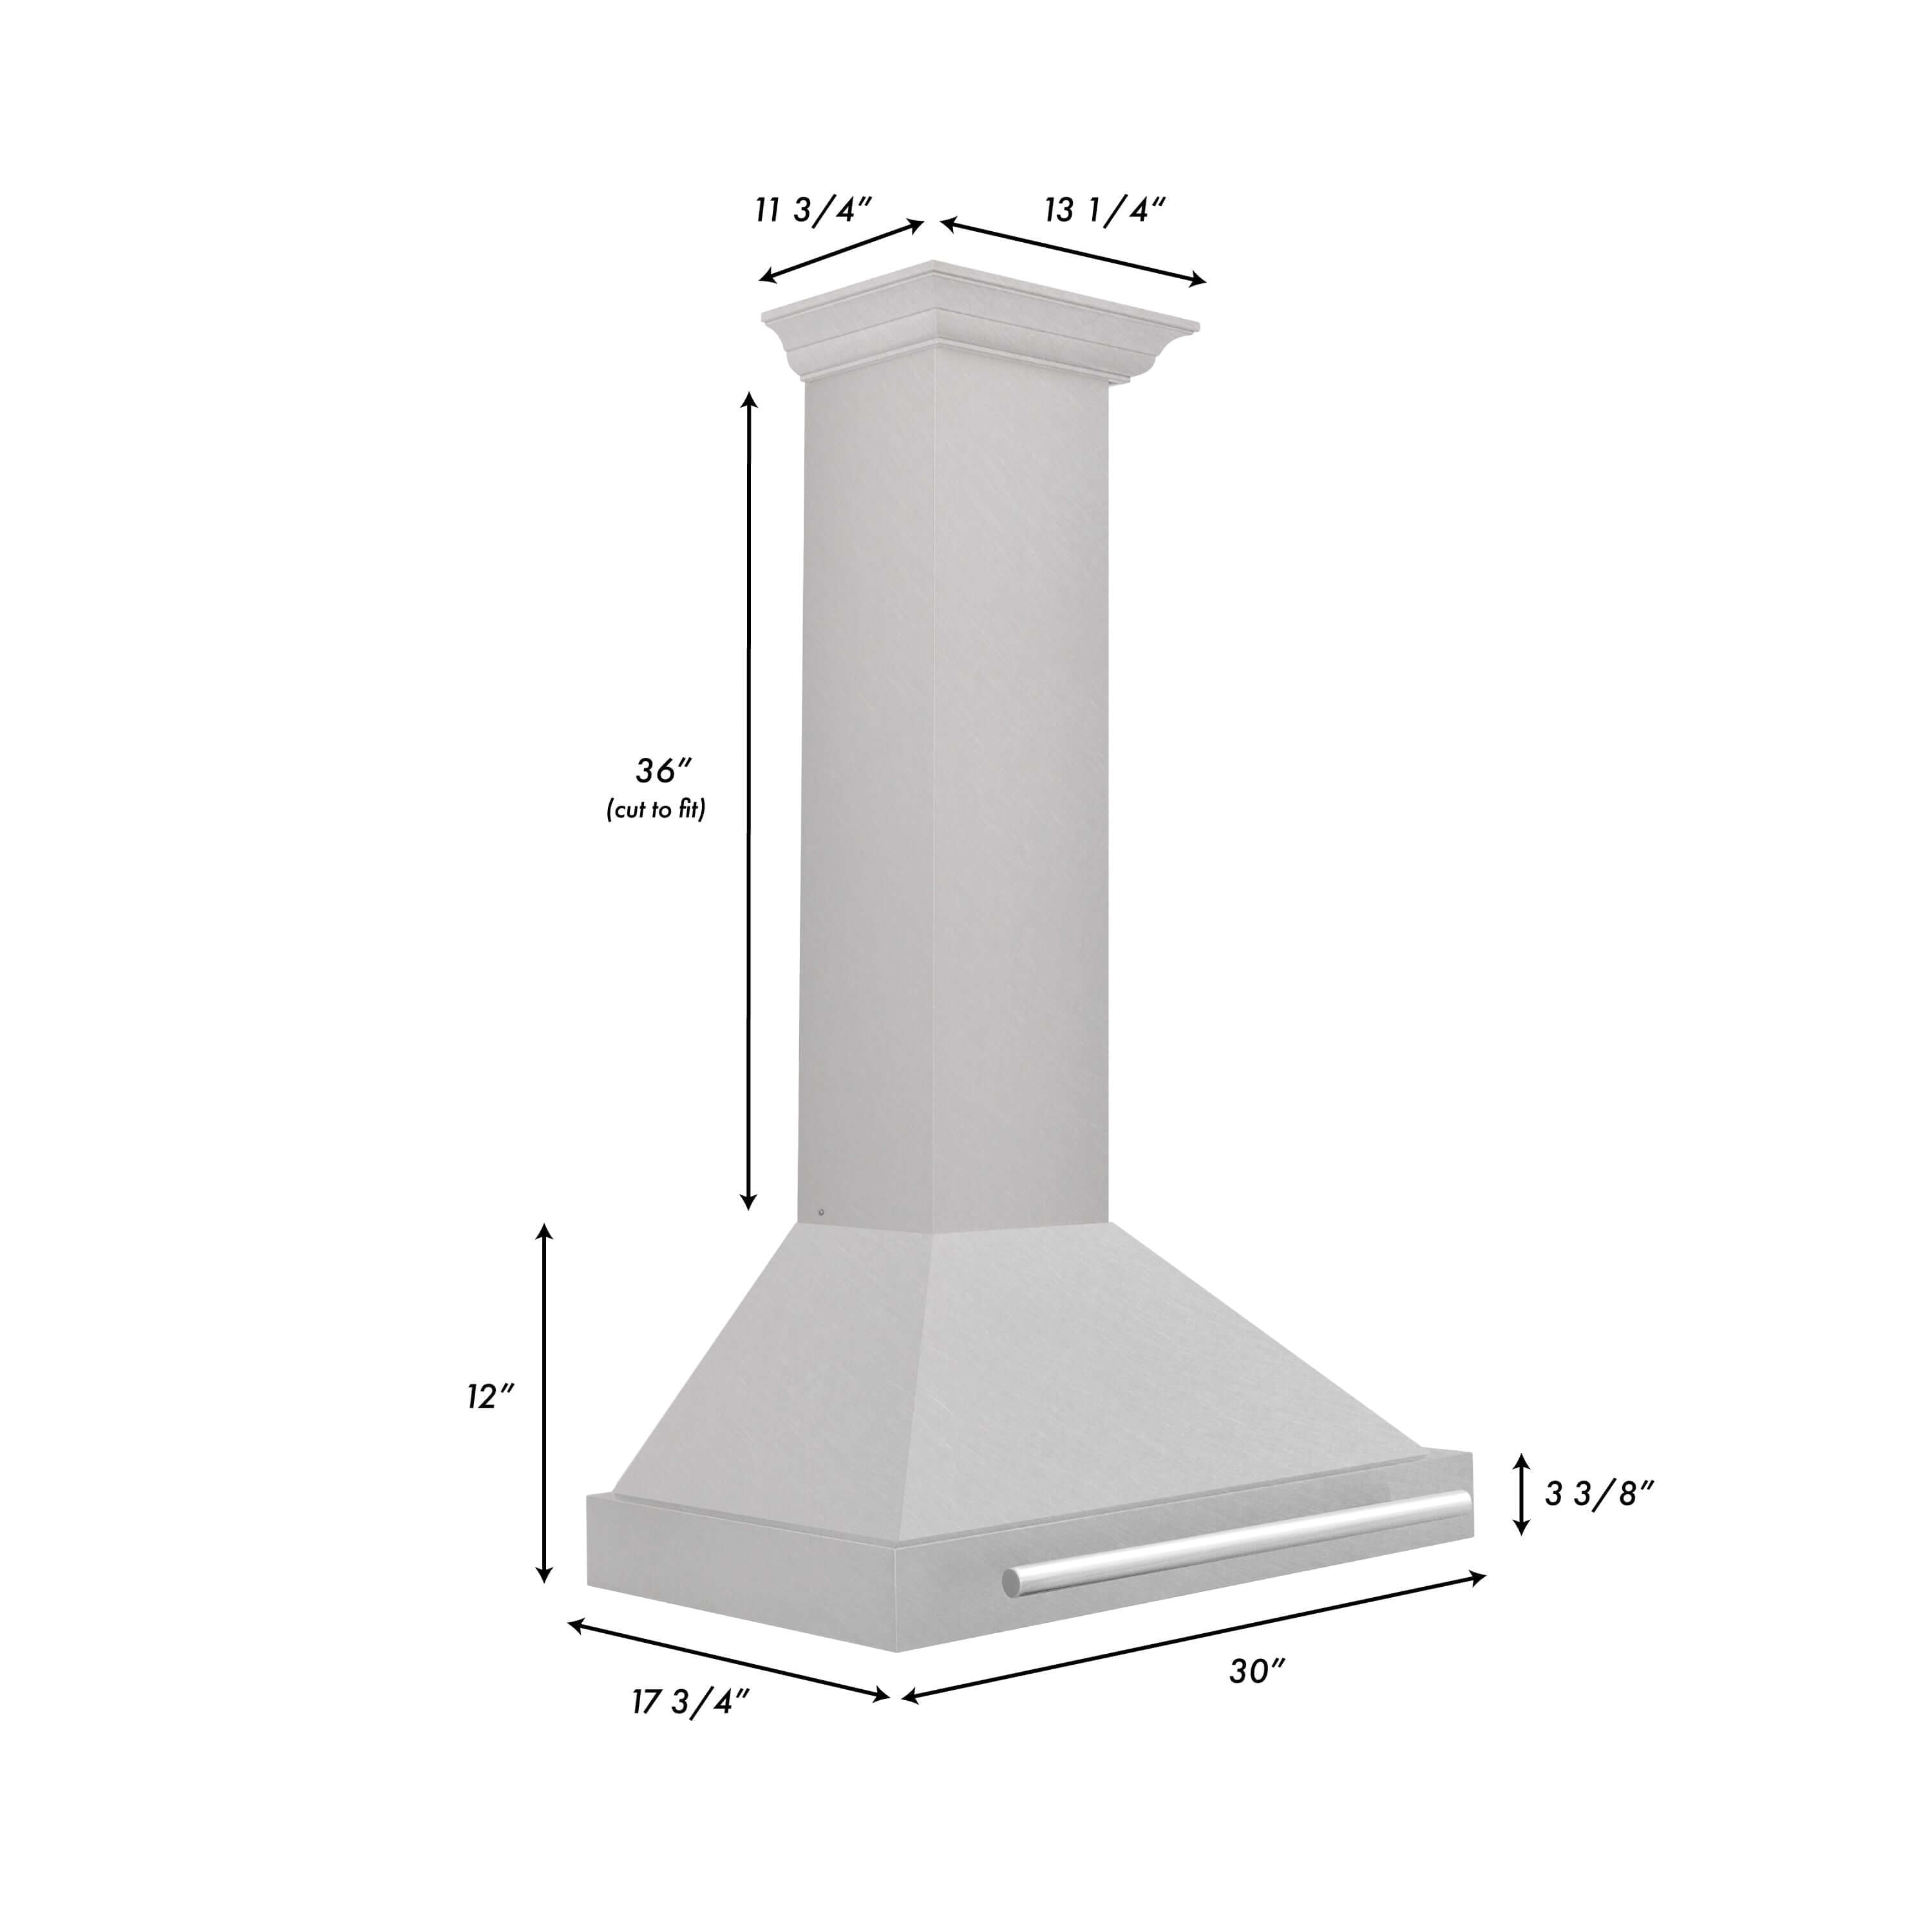 ZLINE 30 in. Convertible Fingerprint Resistant DuraSnow® Stainless Steel Range Hood with Colored Shell Options and Stainless Steel Handle (KB4SNX-30) dimensional diagram and measurements.